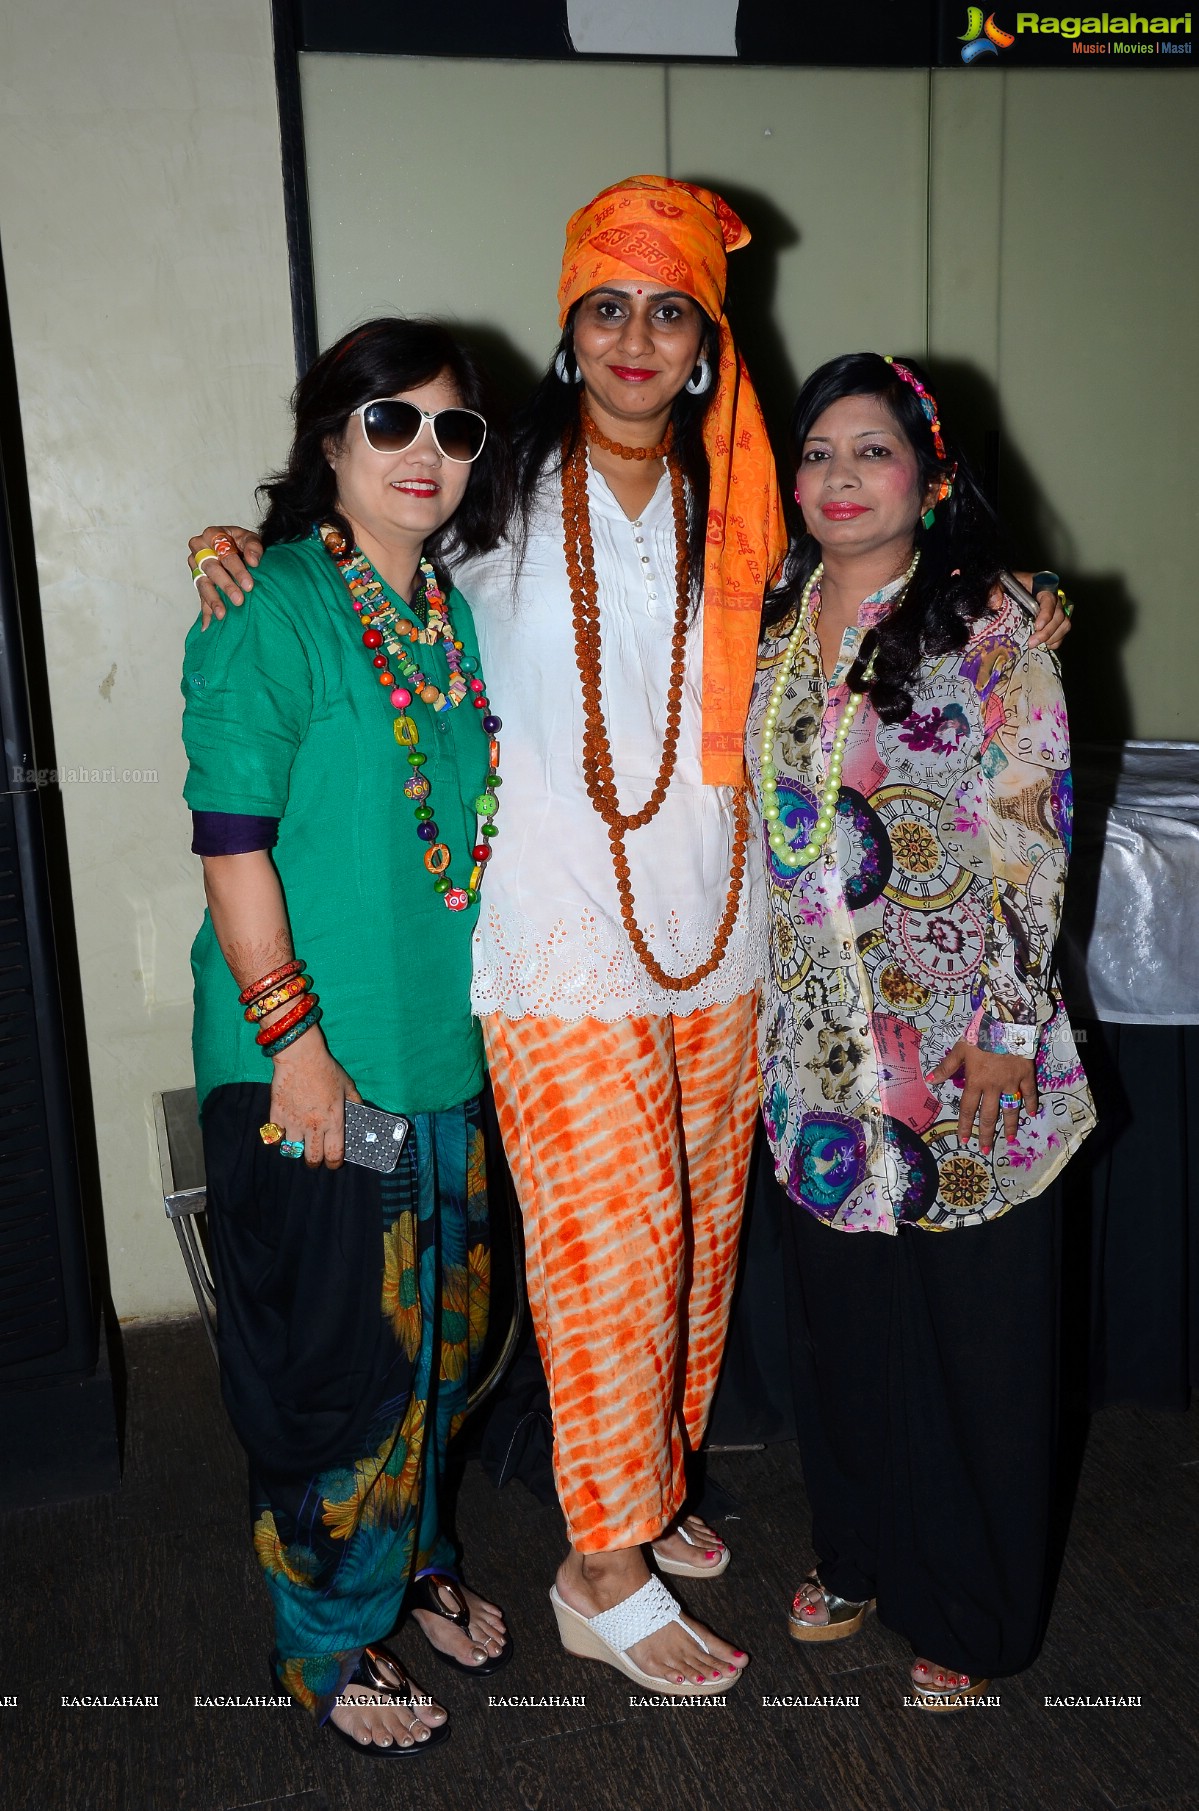 Lions Club of Hyderabad Petals - Retro Style Event with Hare Rama Hare Krishna Theme